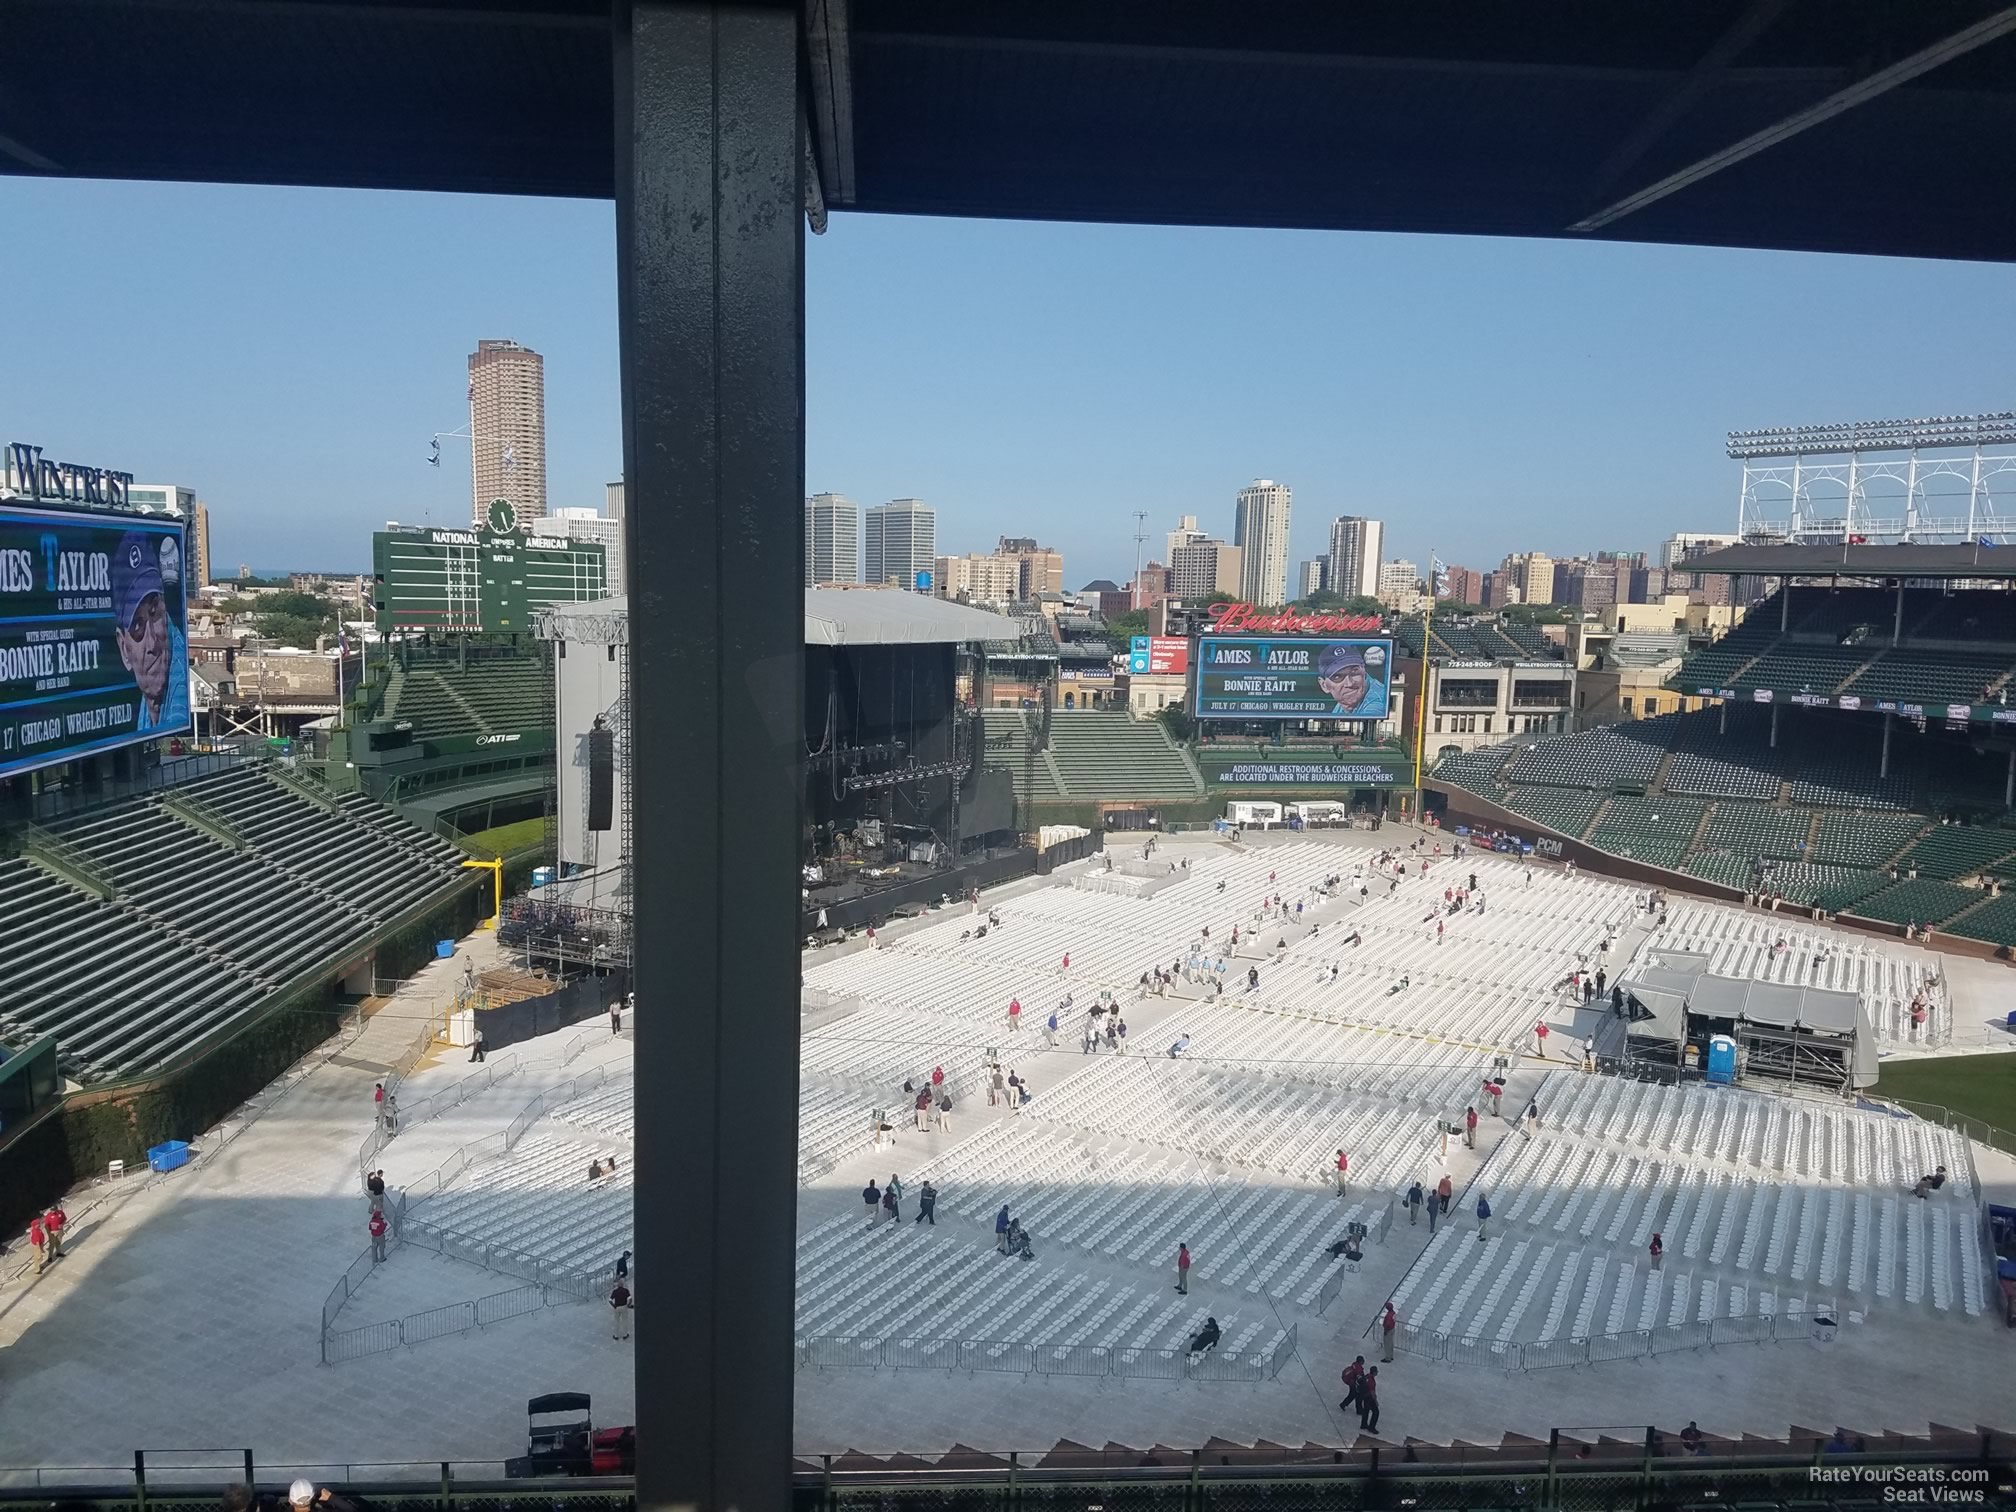 section 405, row 4 seat view  for concert - wrigley field